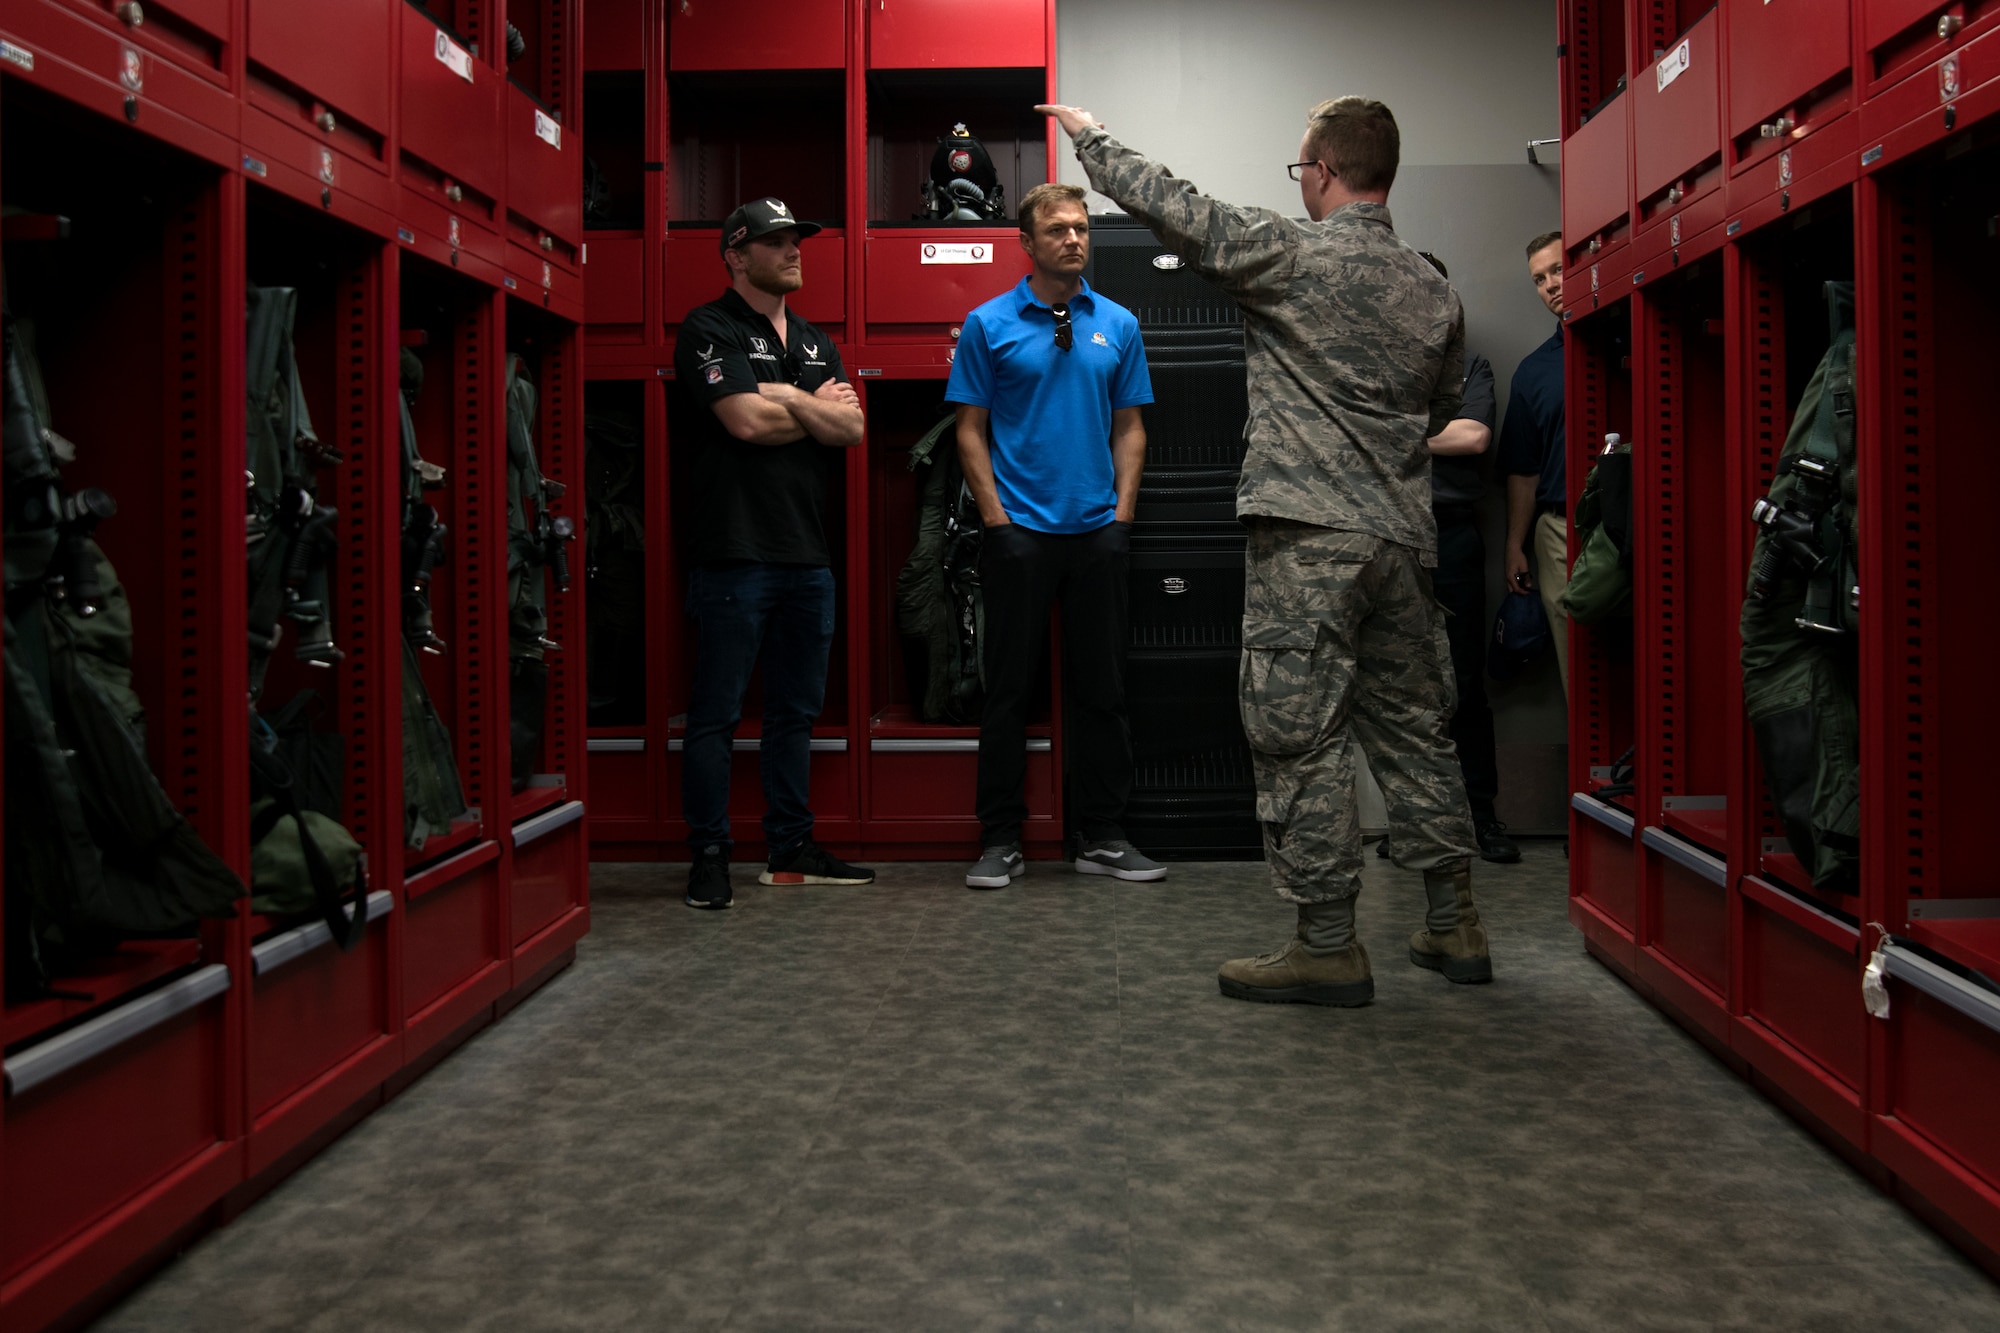 U.S. Air Force Airman 1st Class Carson Buice, 20th Operations Support Squadron aircrew flight equipment technician, speaks to visitors in the 77th Fighter Squadron life support section at Shaw Air Force Base, S.C., April 15, 2019.